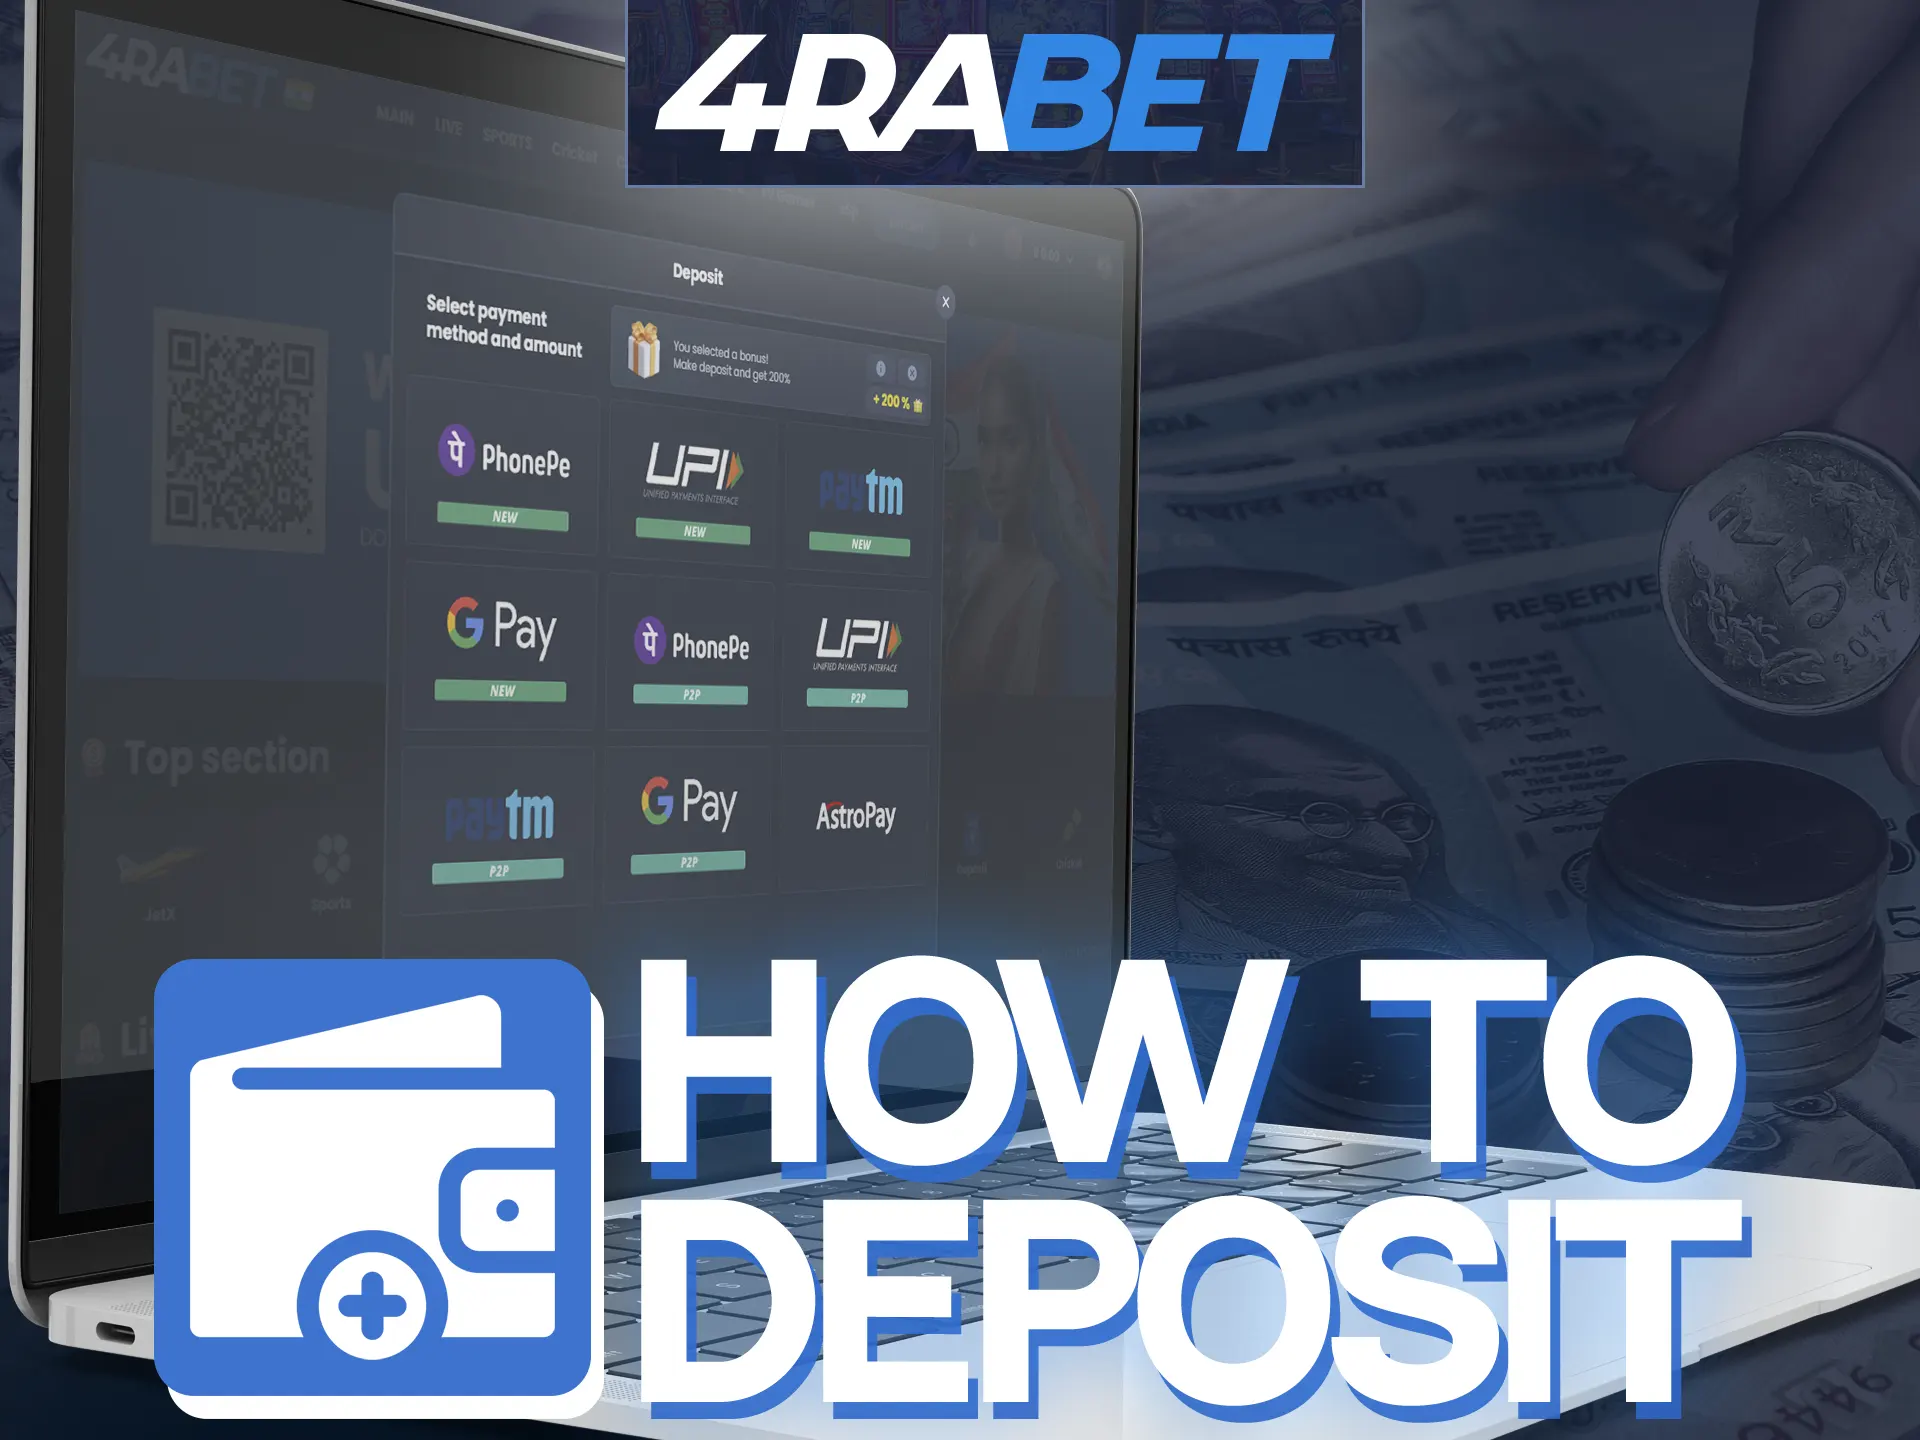 Make your first deposit on the 4Rabet website.